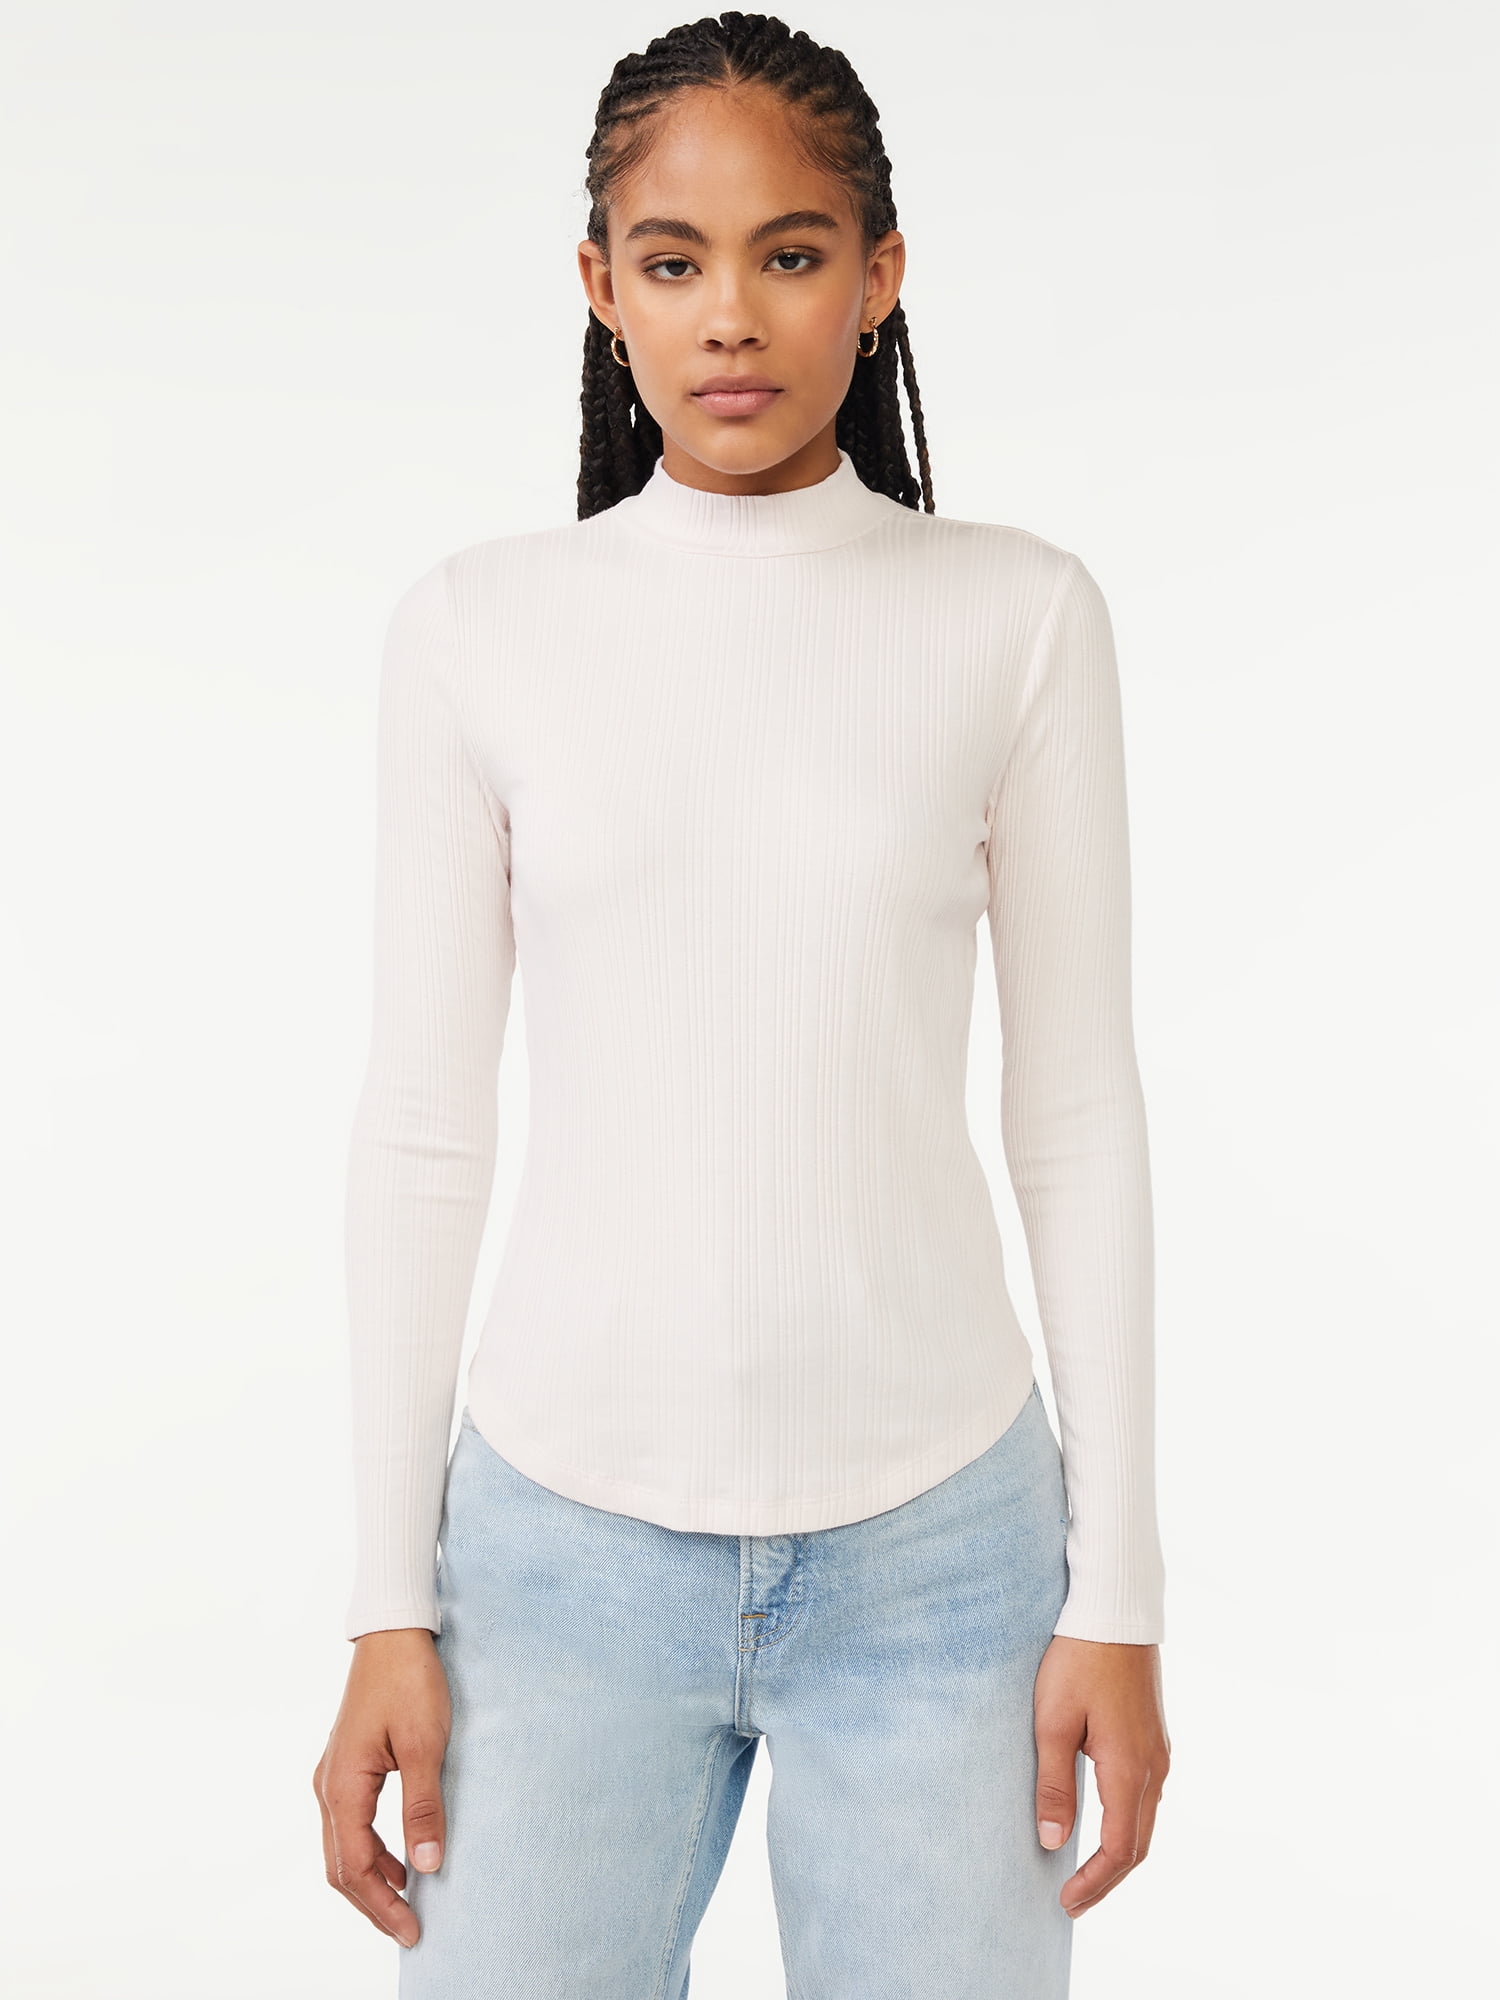 Free Assembly Women's Mock Neck Novelty Rib Tee with Long Sleeves ...